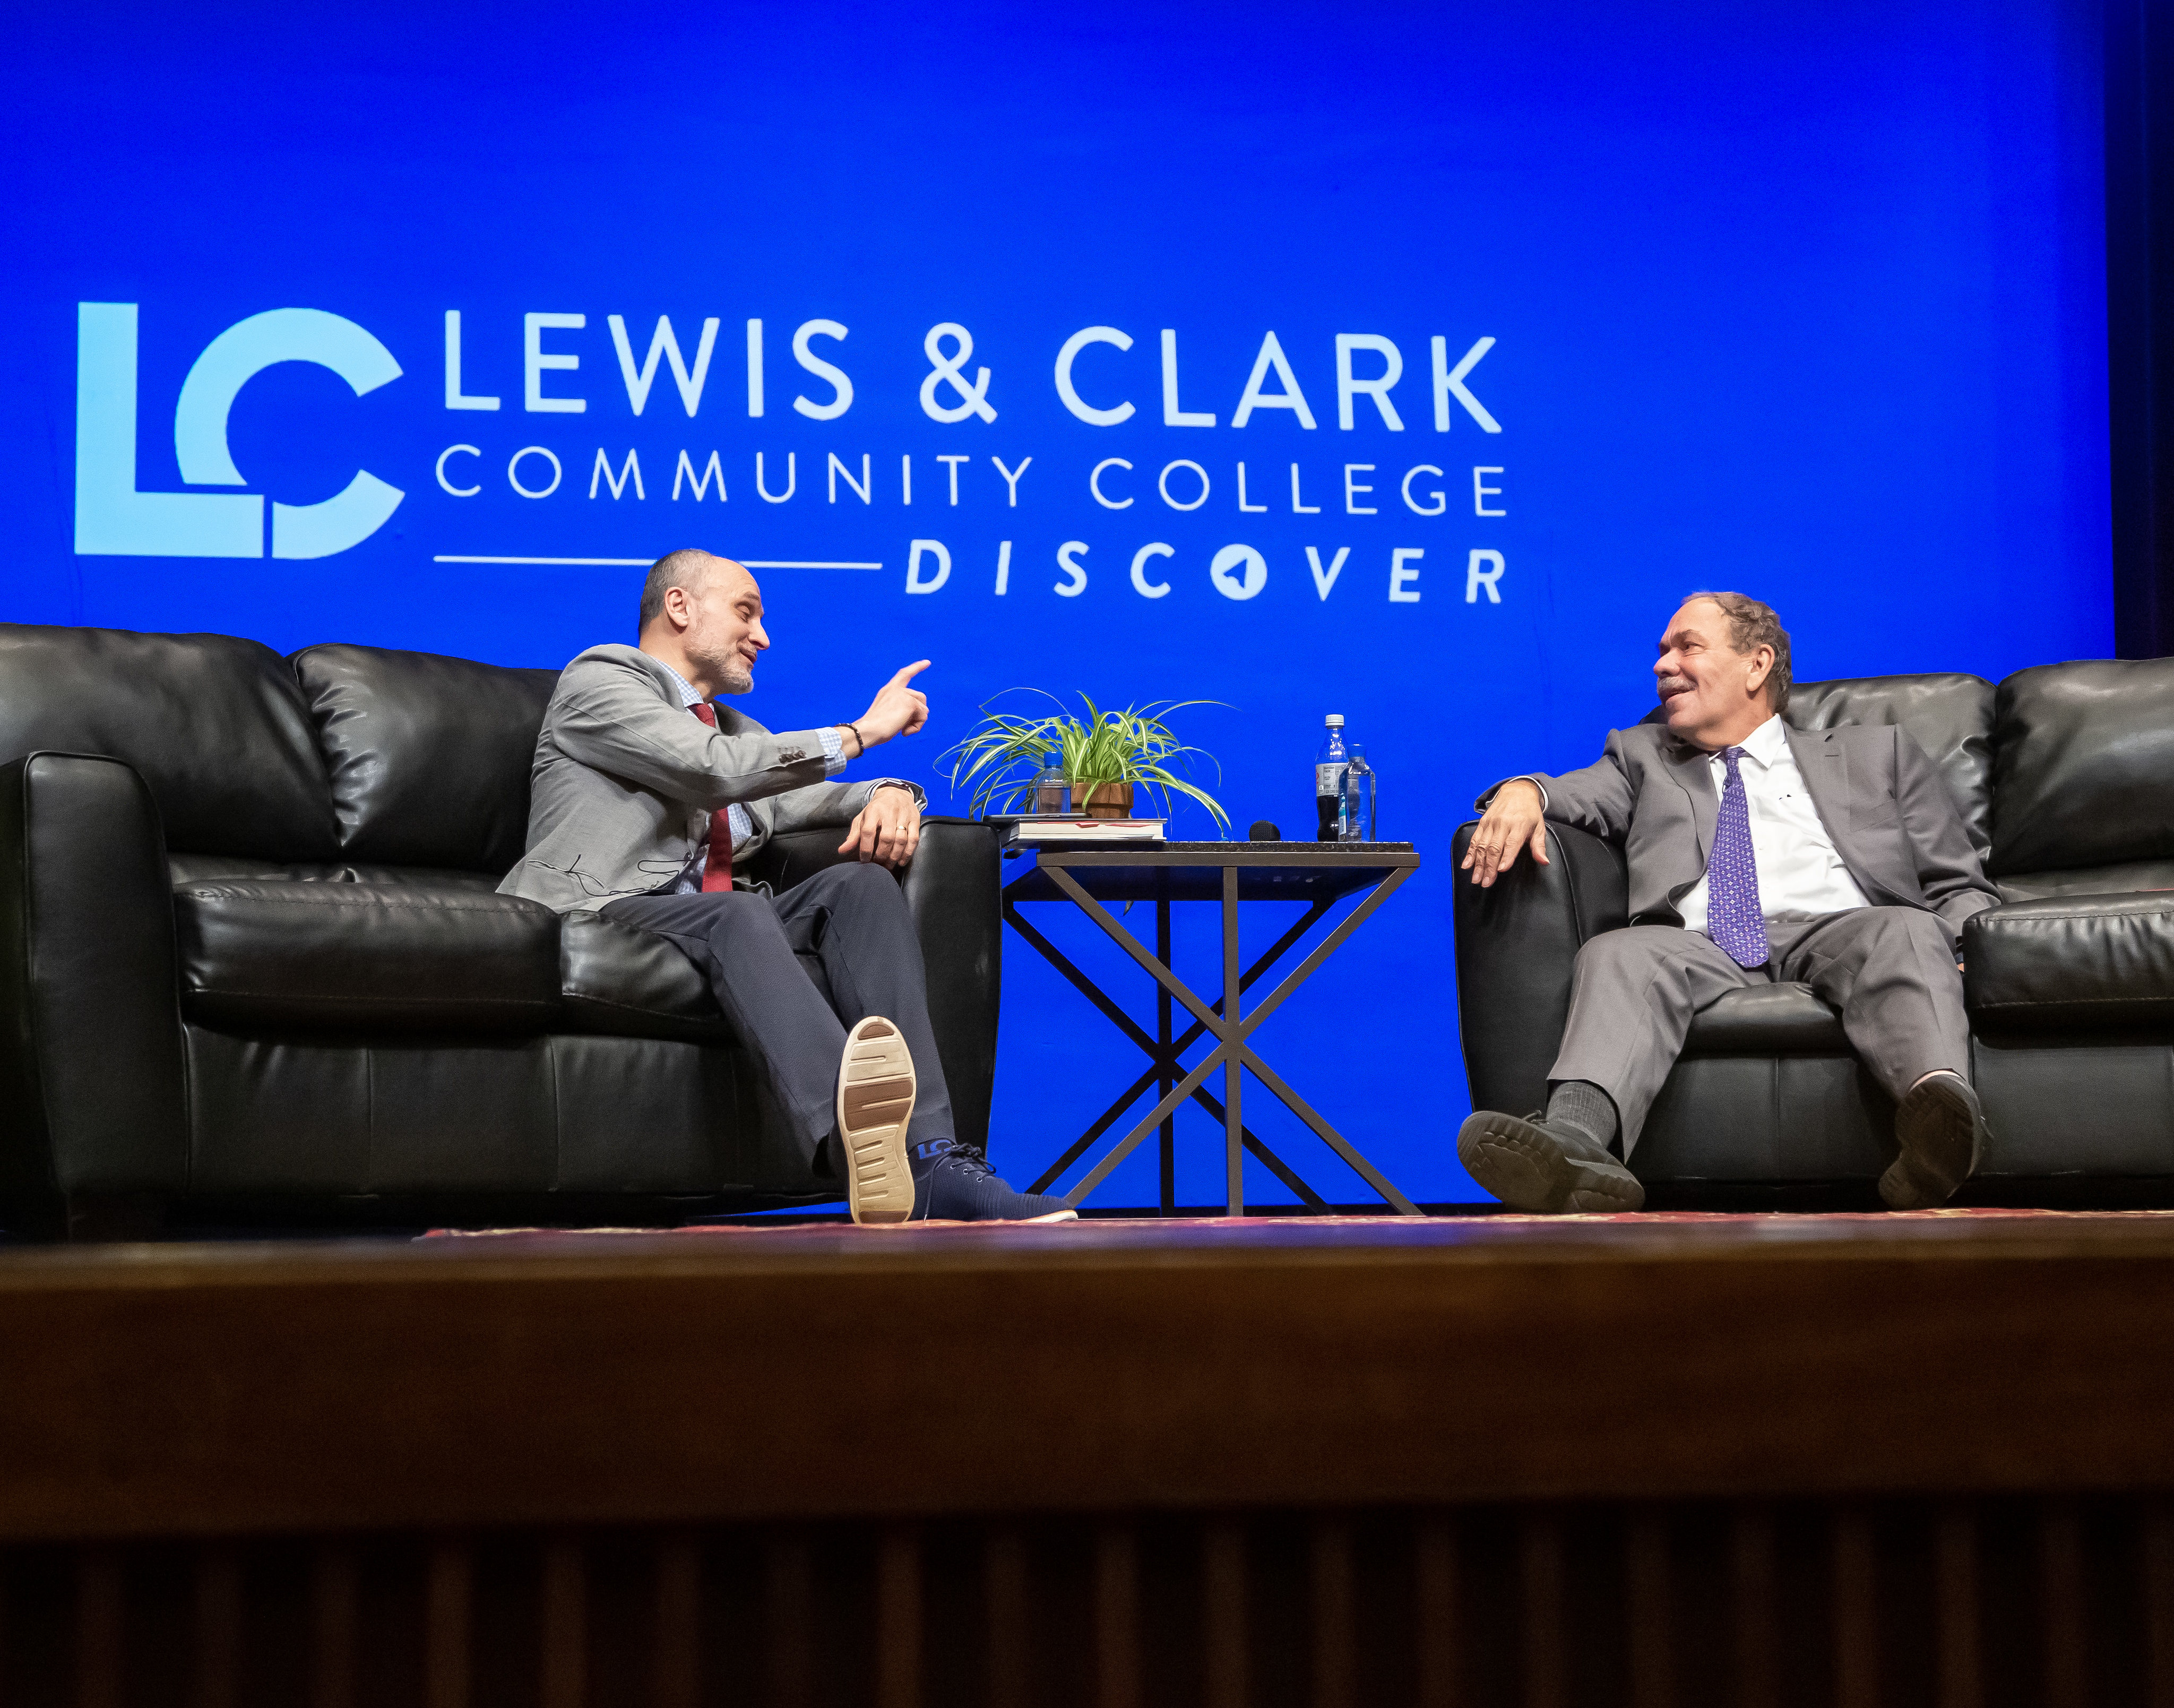 L&C President Ken Trzaska banters with guest speaker Arthur Levine, higher education expert and co-author of “The Great Upheaval,” on stage in the Hatheway Cultural Center, Tuesday, Feb. 7. Photo by JAN DONA/L&C Marketing & PR